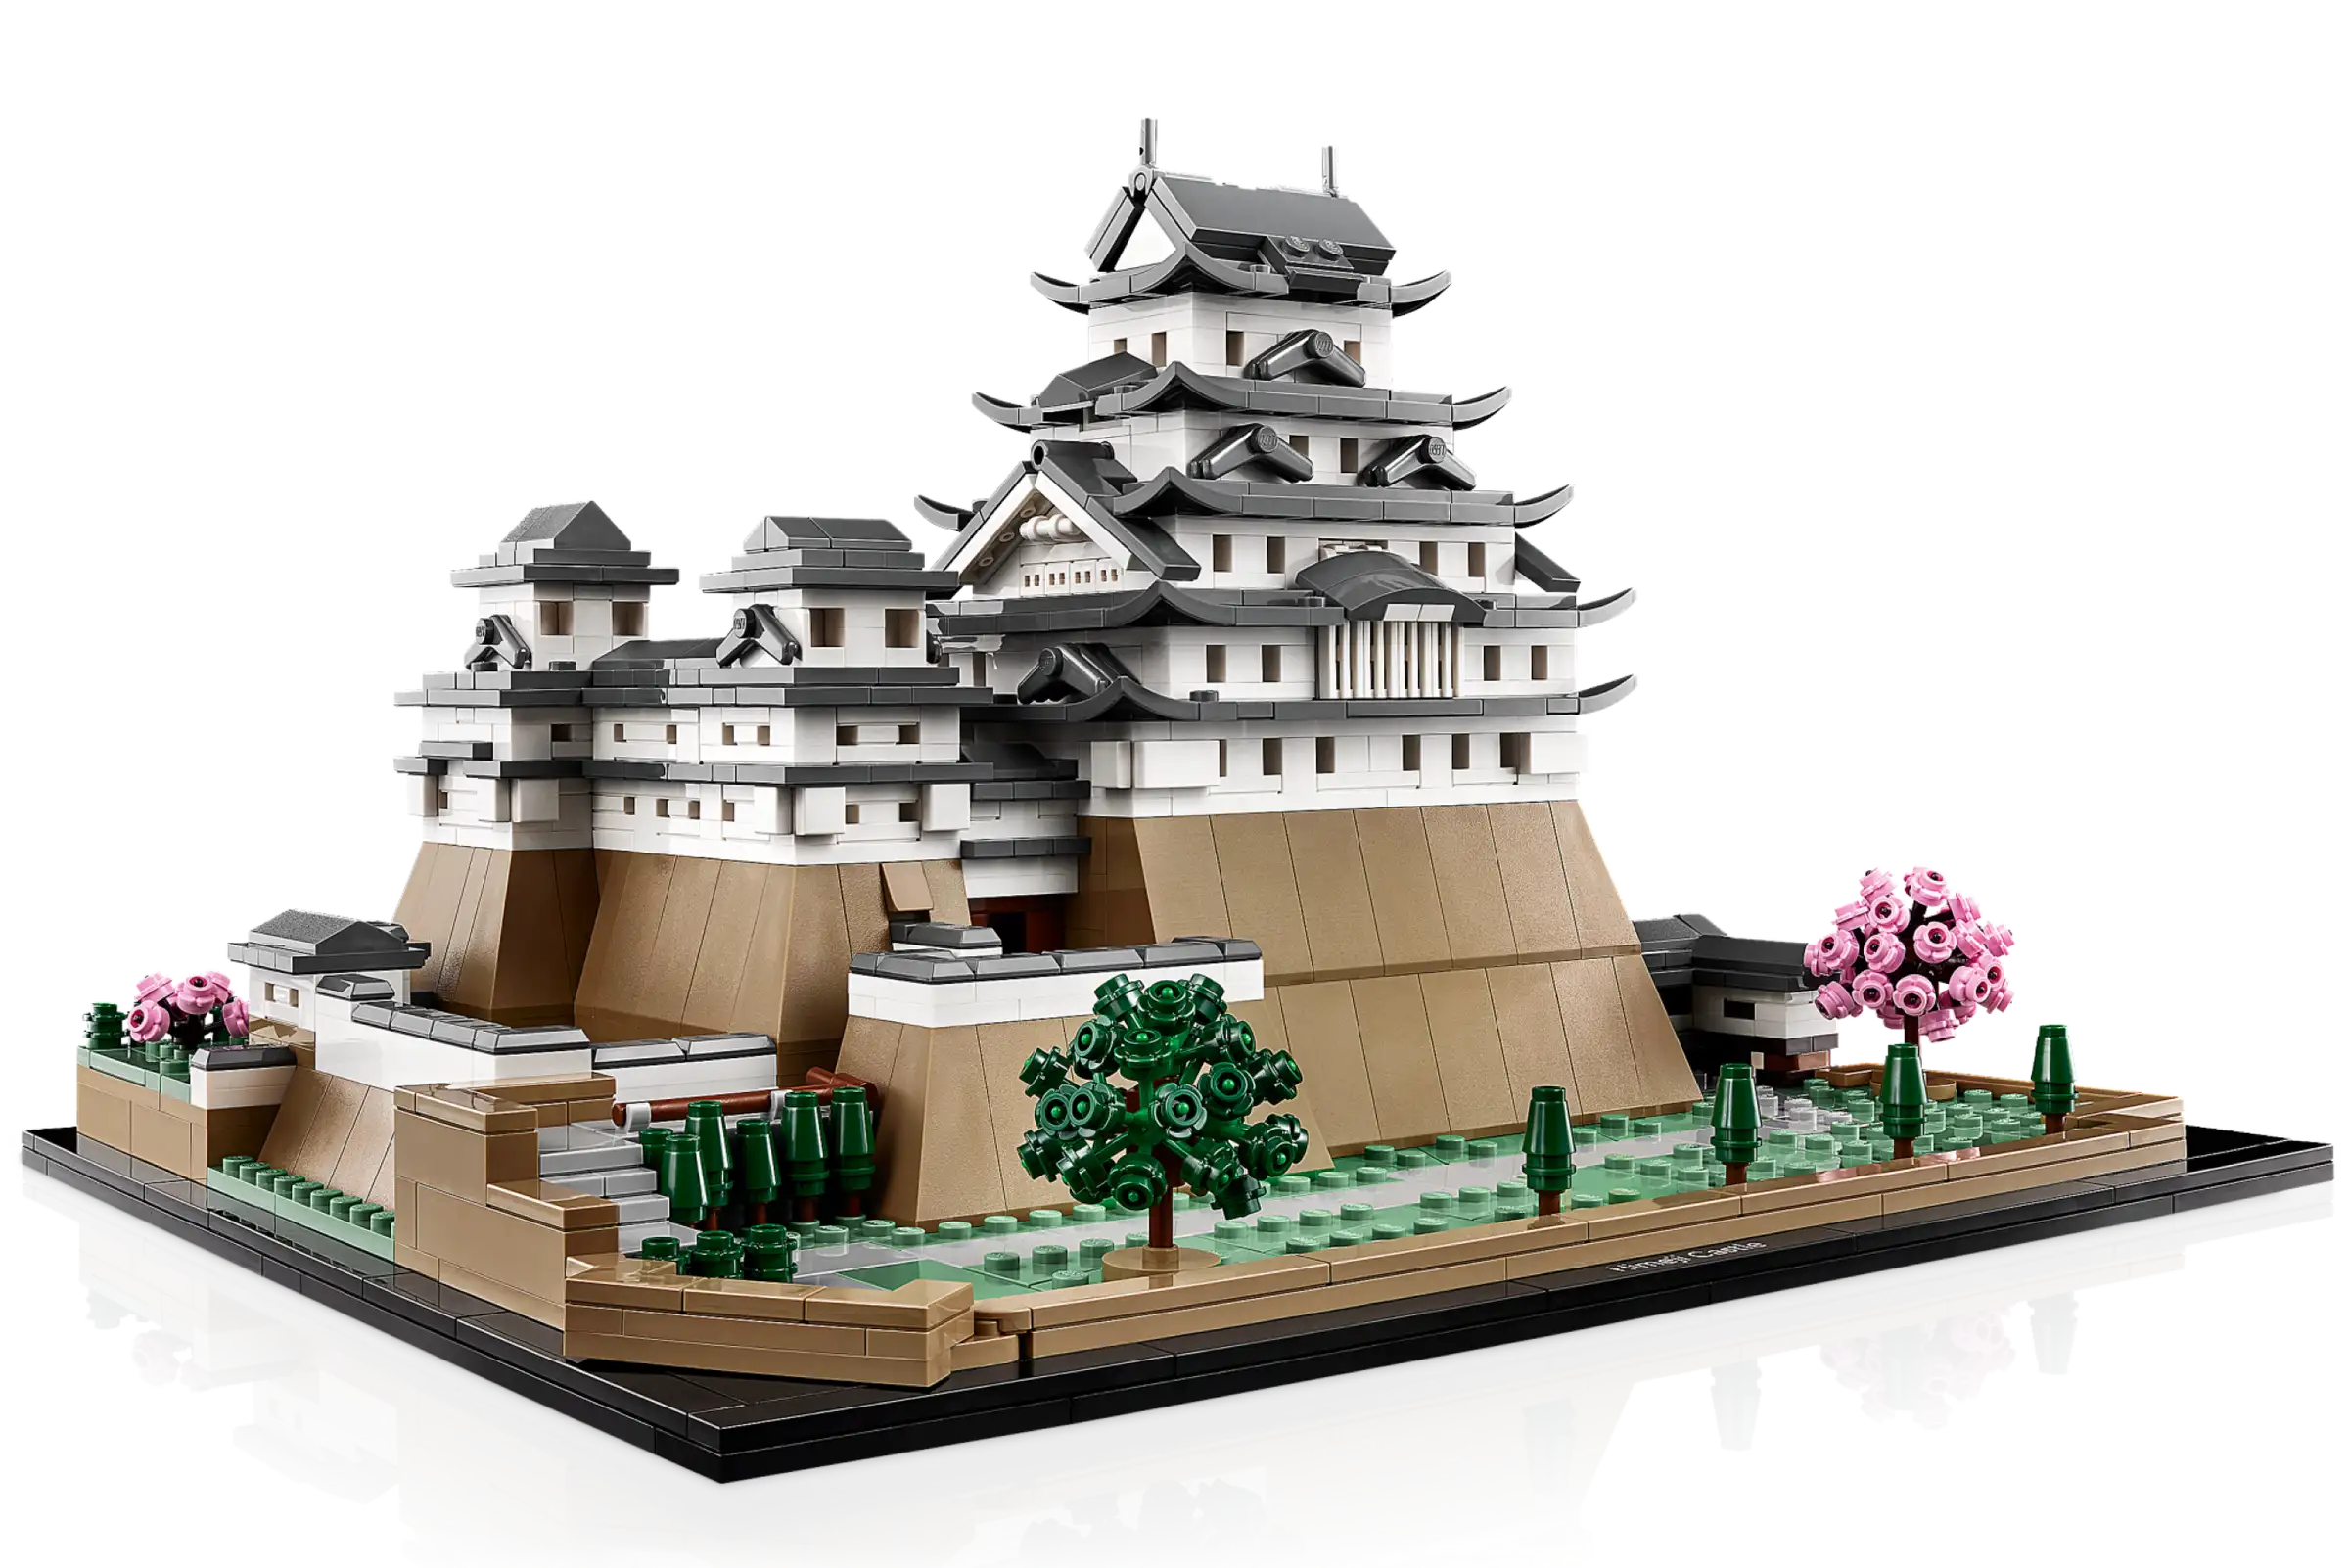 Lego - Japan Today